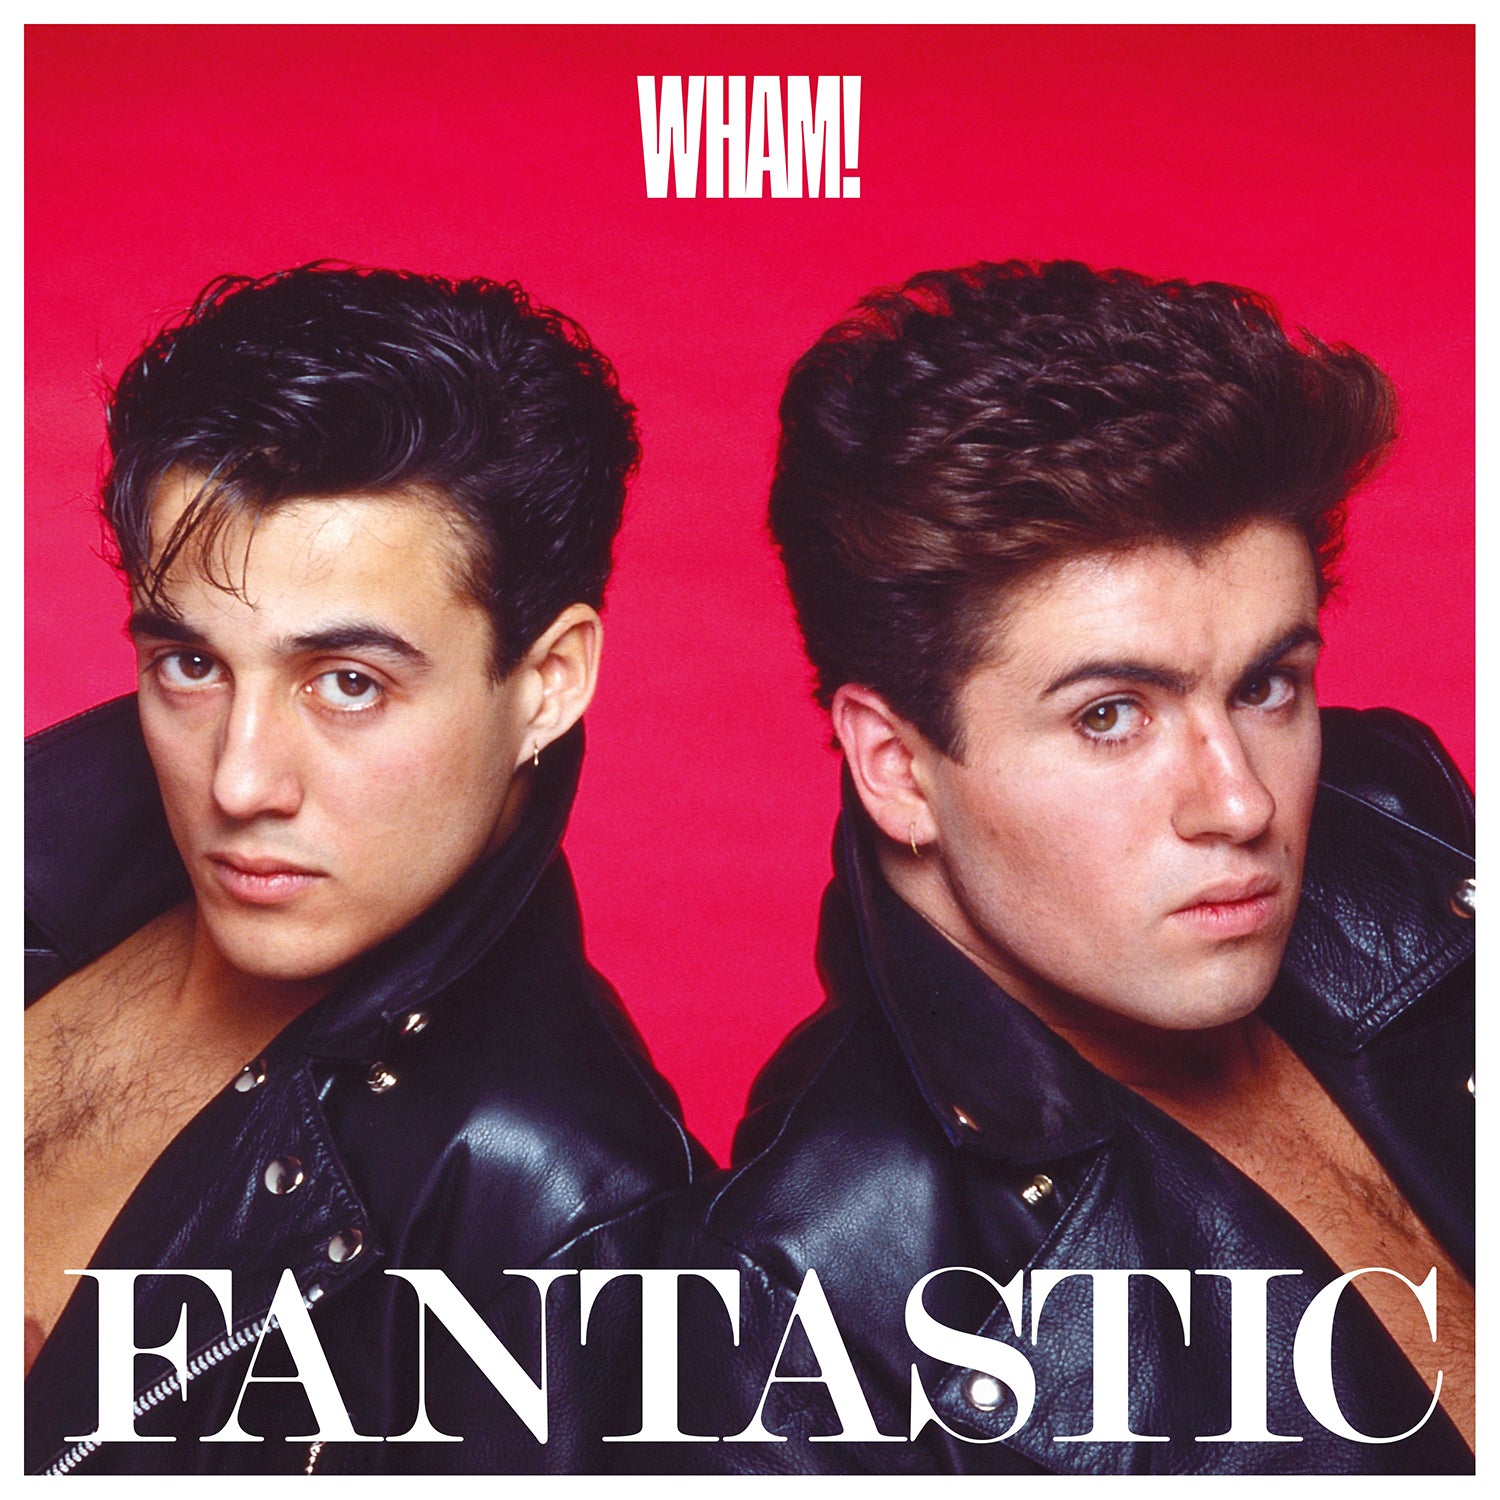 Wham! / SDE-exclusive Fantastic blu-ray audio with Dolby Atmos Mix and bonus tracks